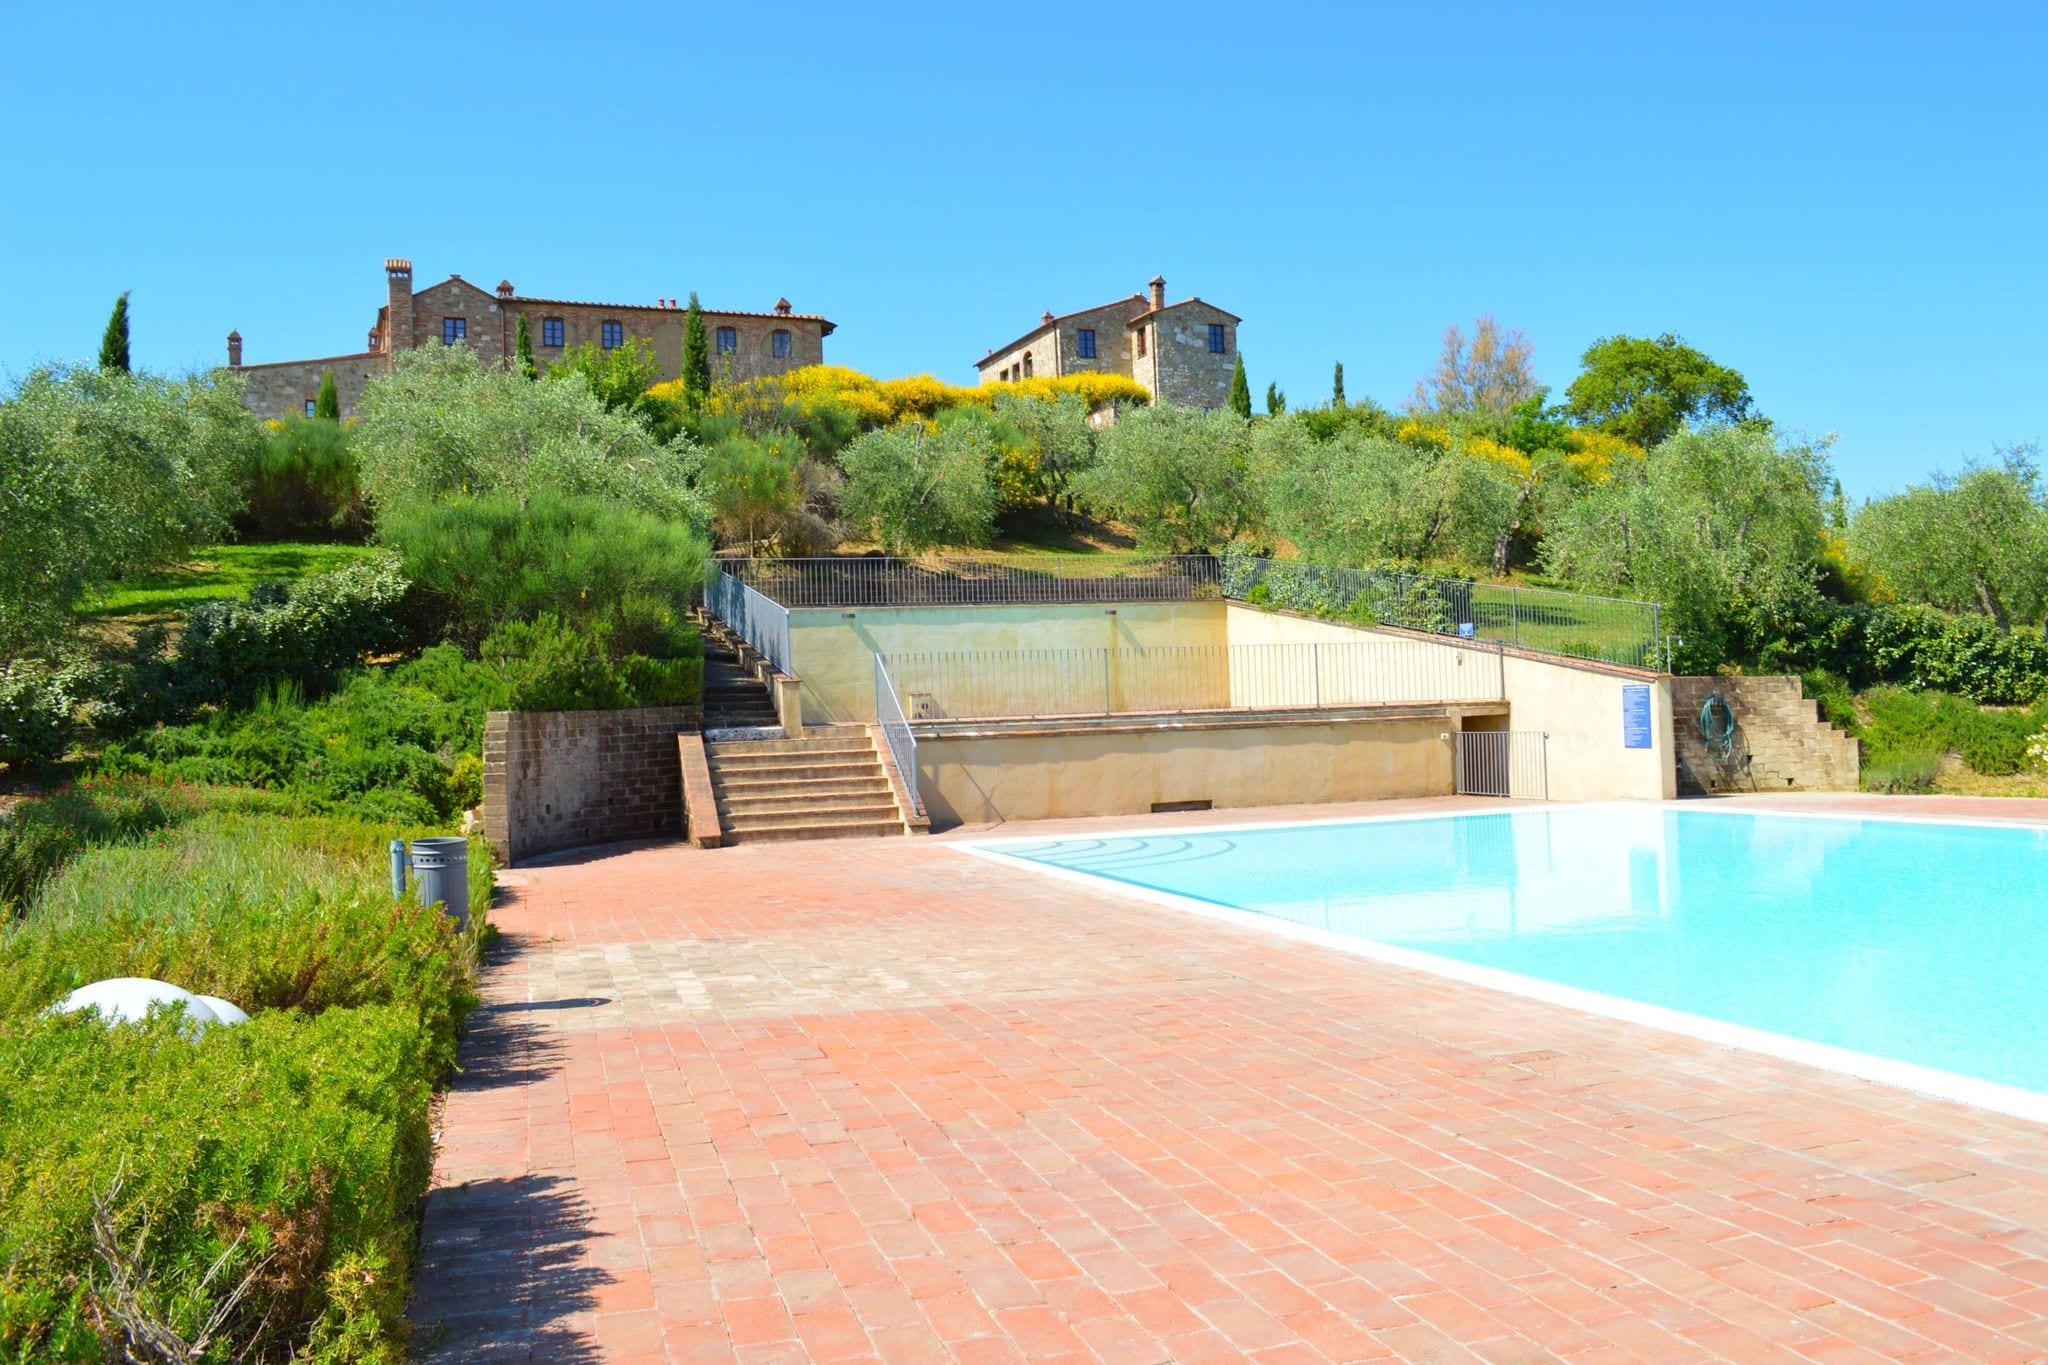 Apartment with 2 pools in the hills of Siena